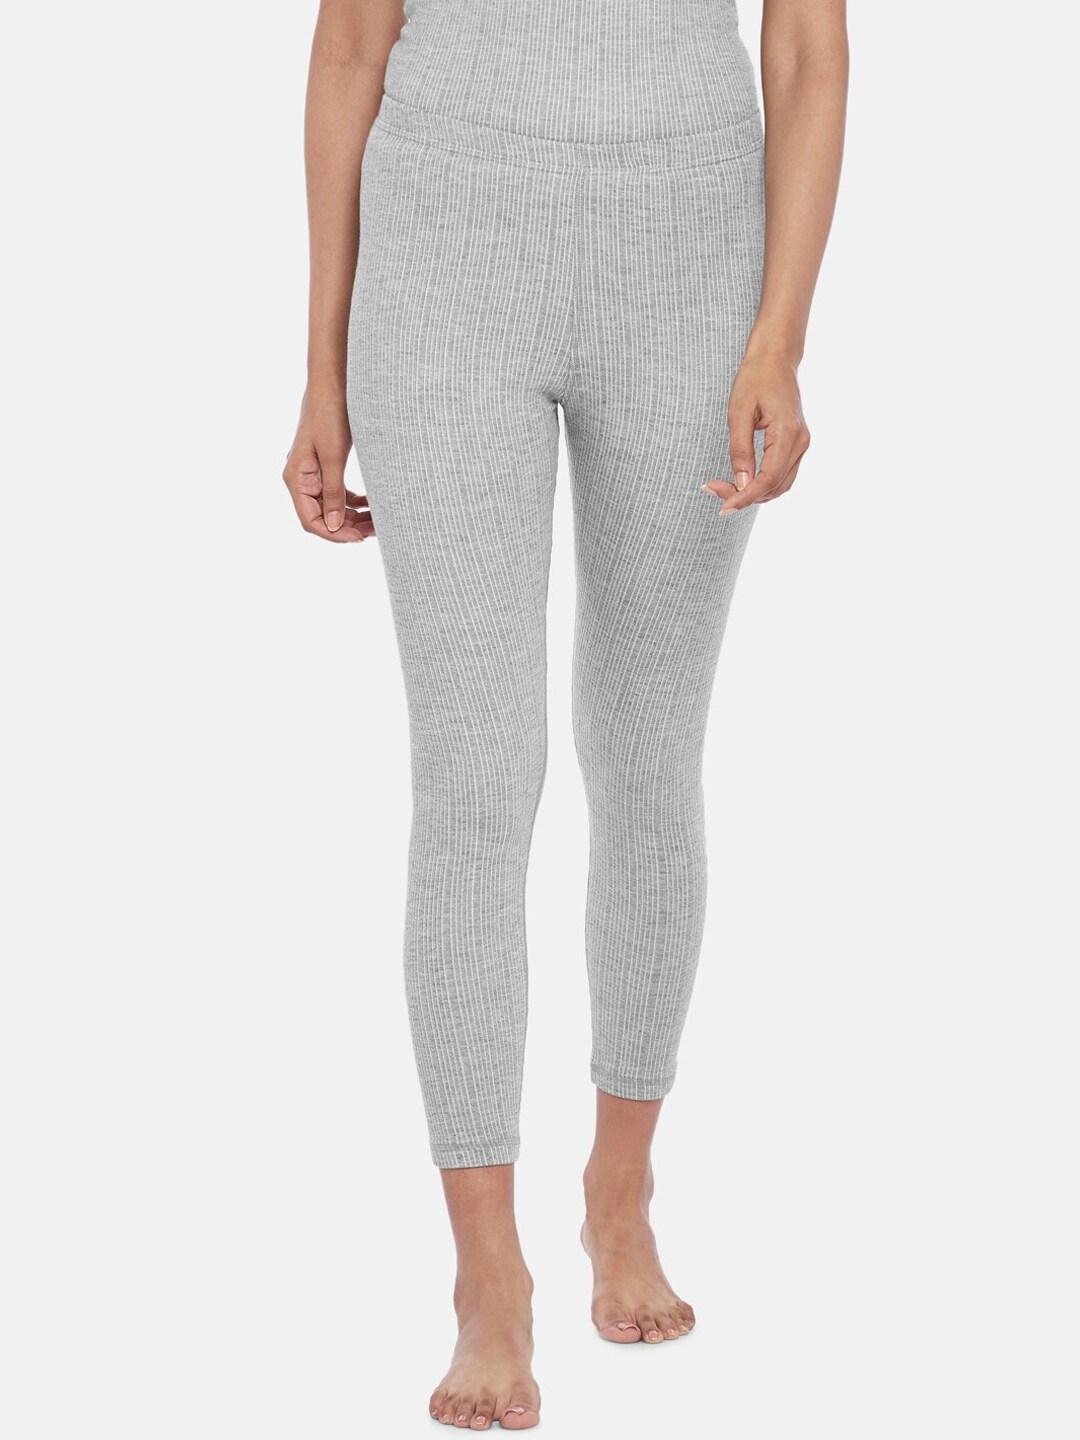 dreamz-by-pantaloons-women-grey-solid-thermal-bottoms